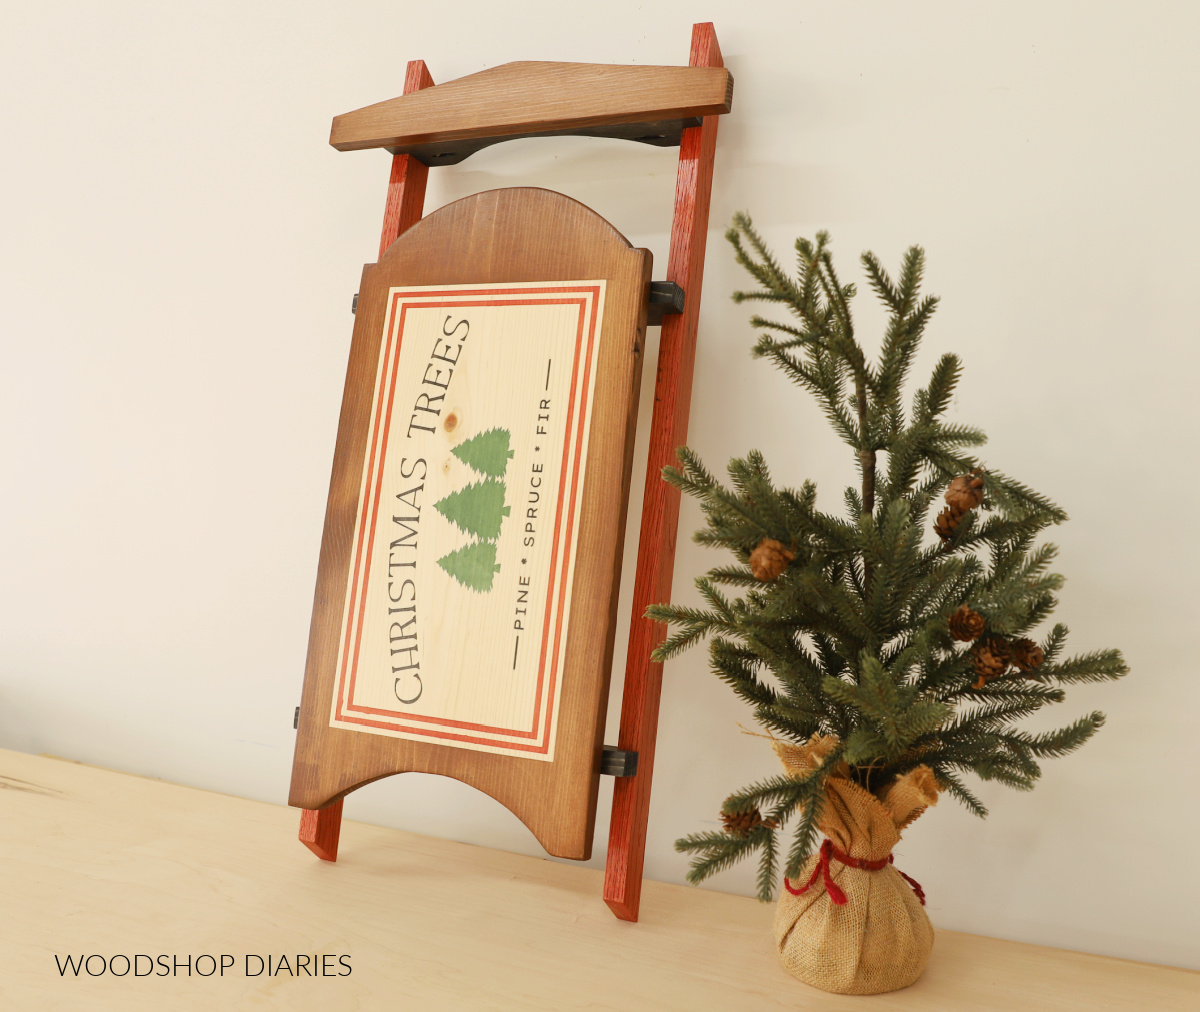 DIY Wooden Sled propped up against wall next to faux Christmas tree. Sled seat has stenciled design showing Christmas Trees